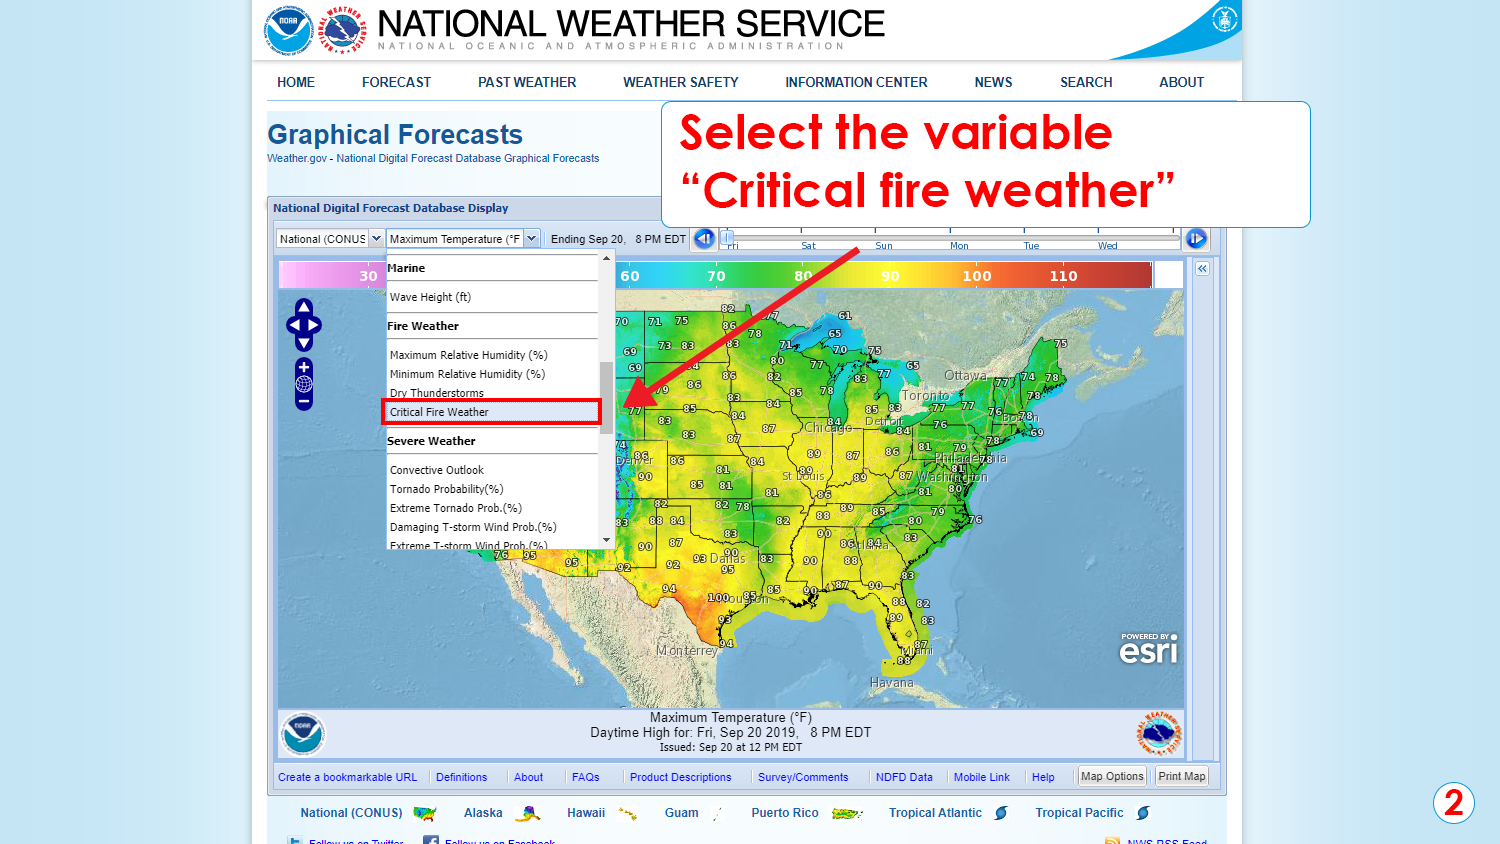 Step 2: Select the variable "Critical fire weather" from the second drop-down menu from the left. 